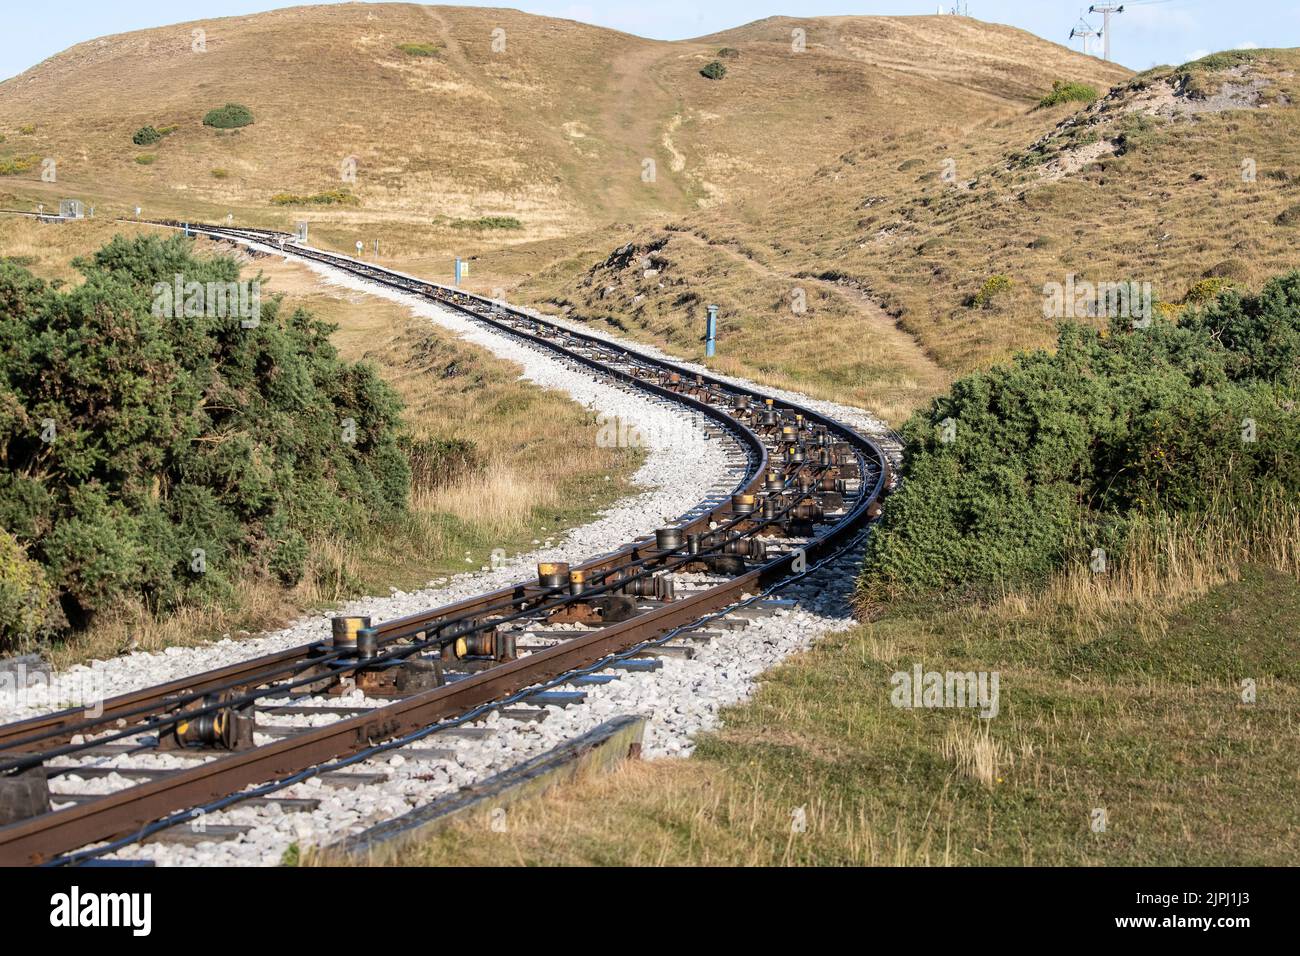 The cables and rollers of the Great Orme tramway on the surface of the tracks on the three cable upper section of the tramway  to equalize car weight Stock Photo